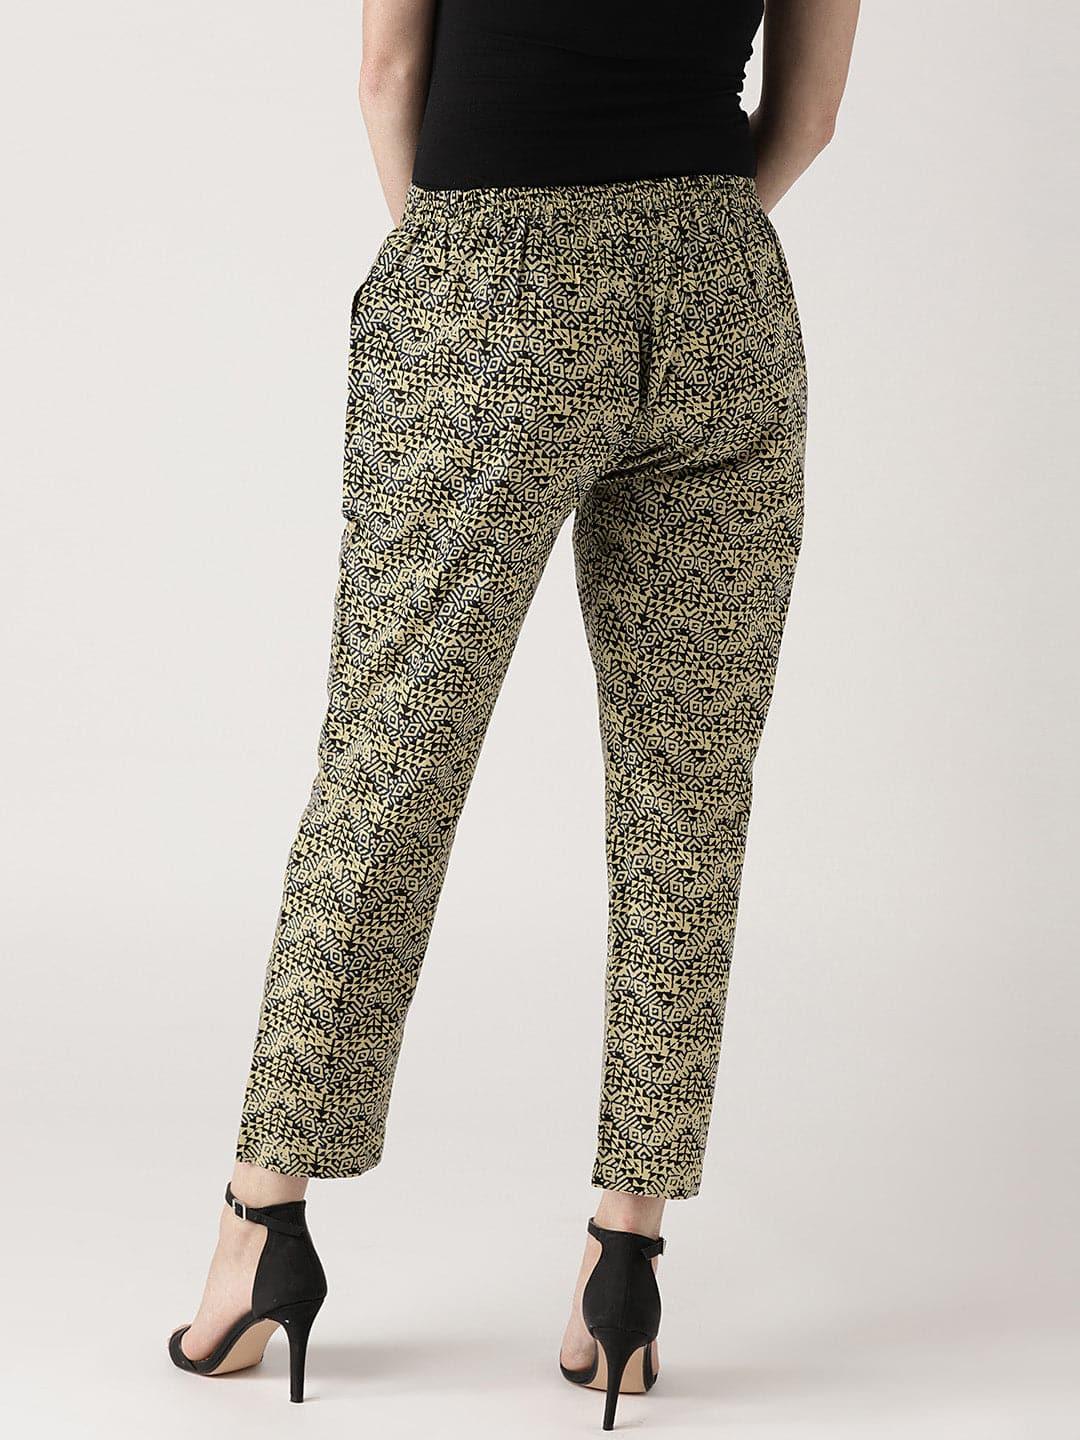 Beige Printed Cotton Trousers - Libas